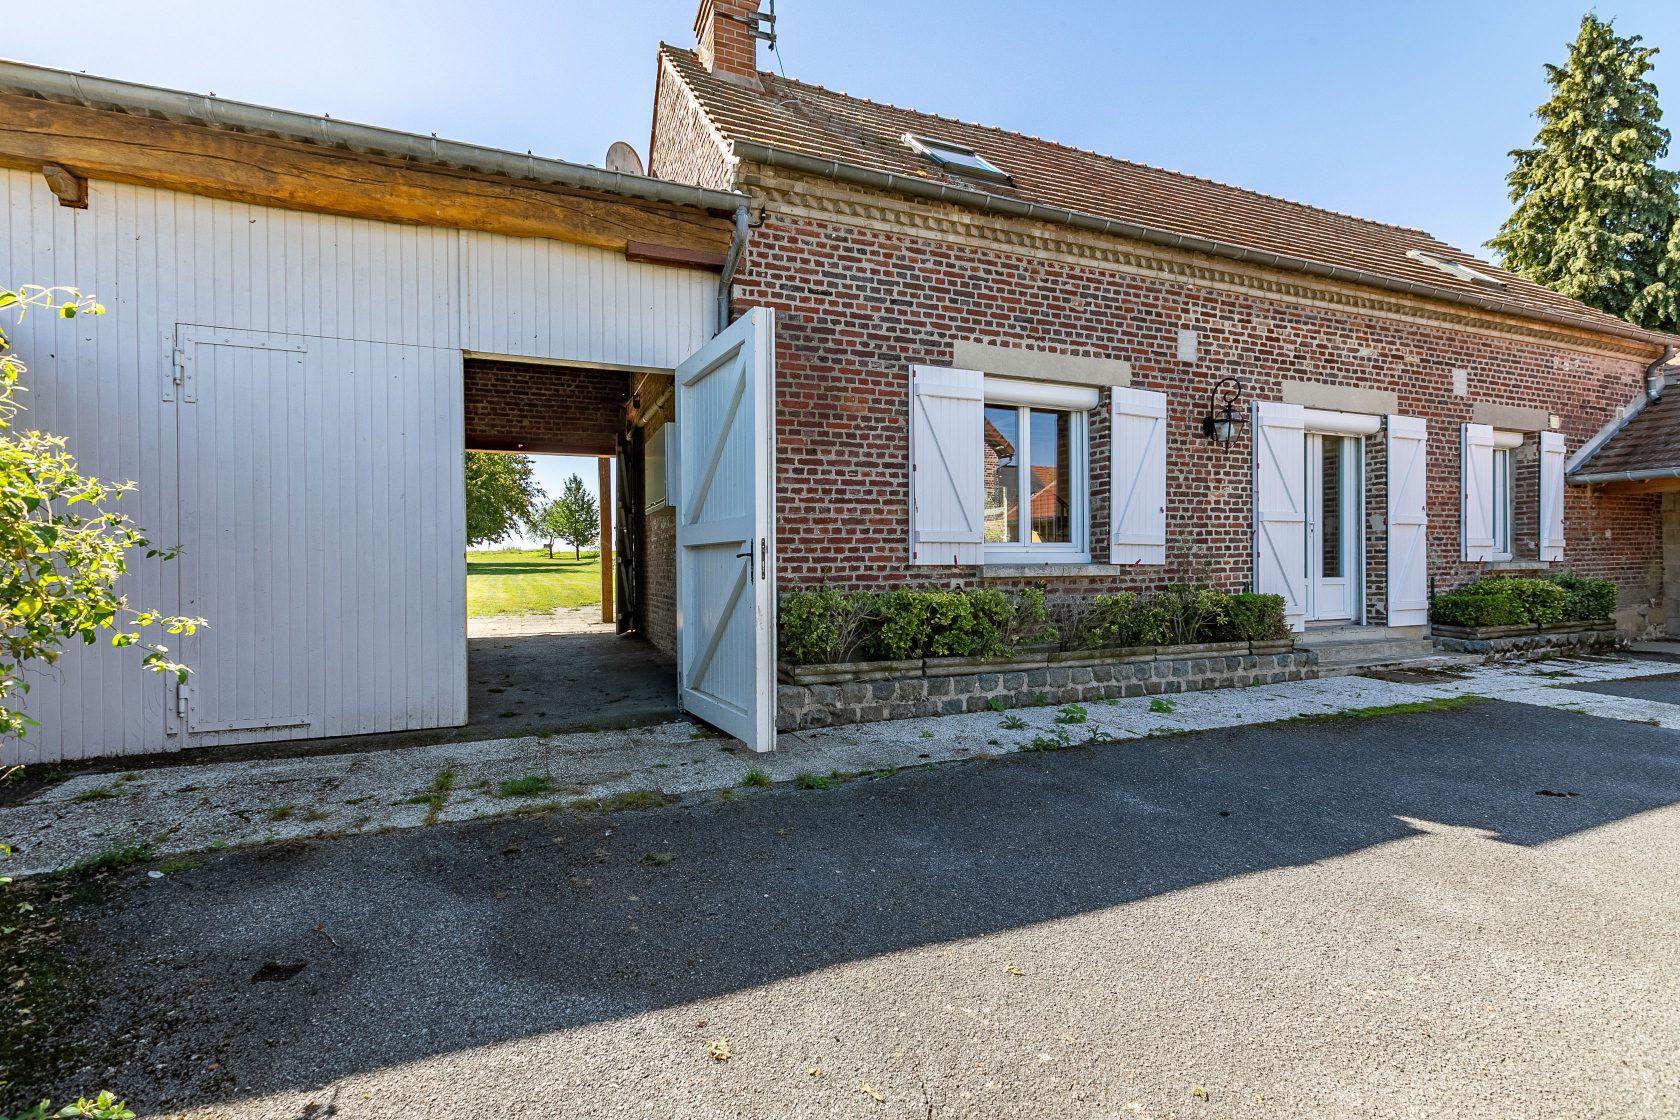 2 in 1 – Charming fully renovated farmhouse and its converted outbuilding